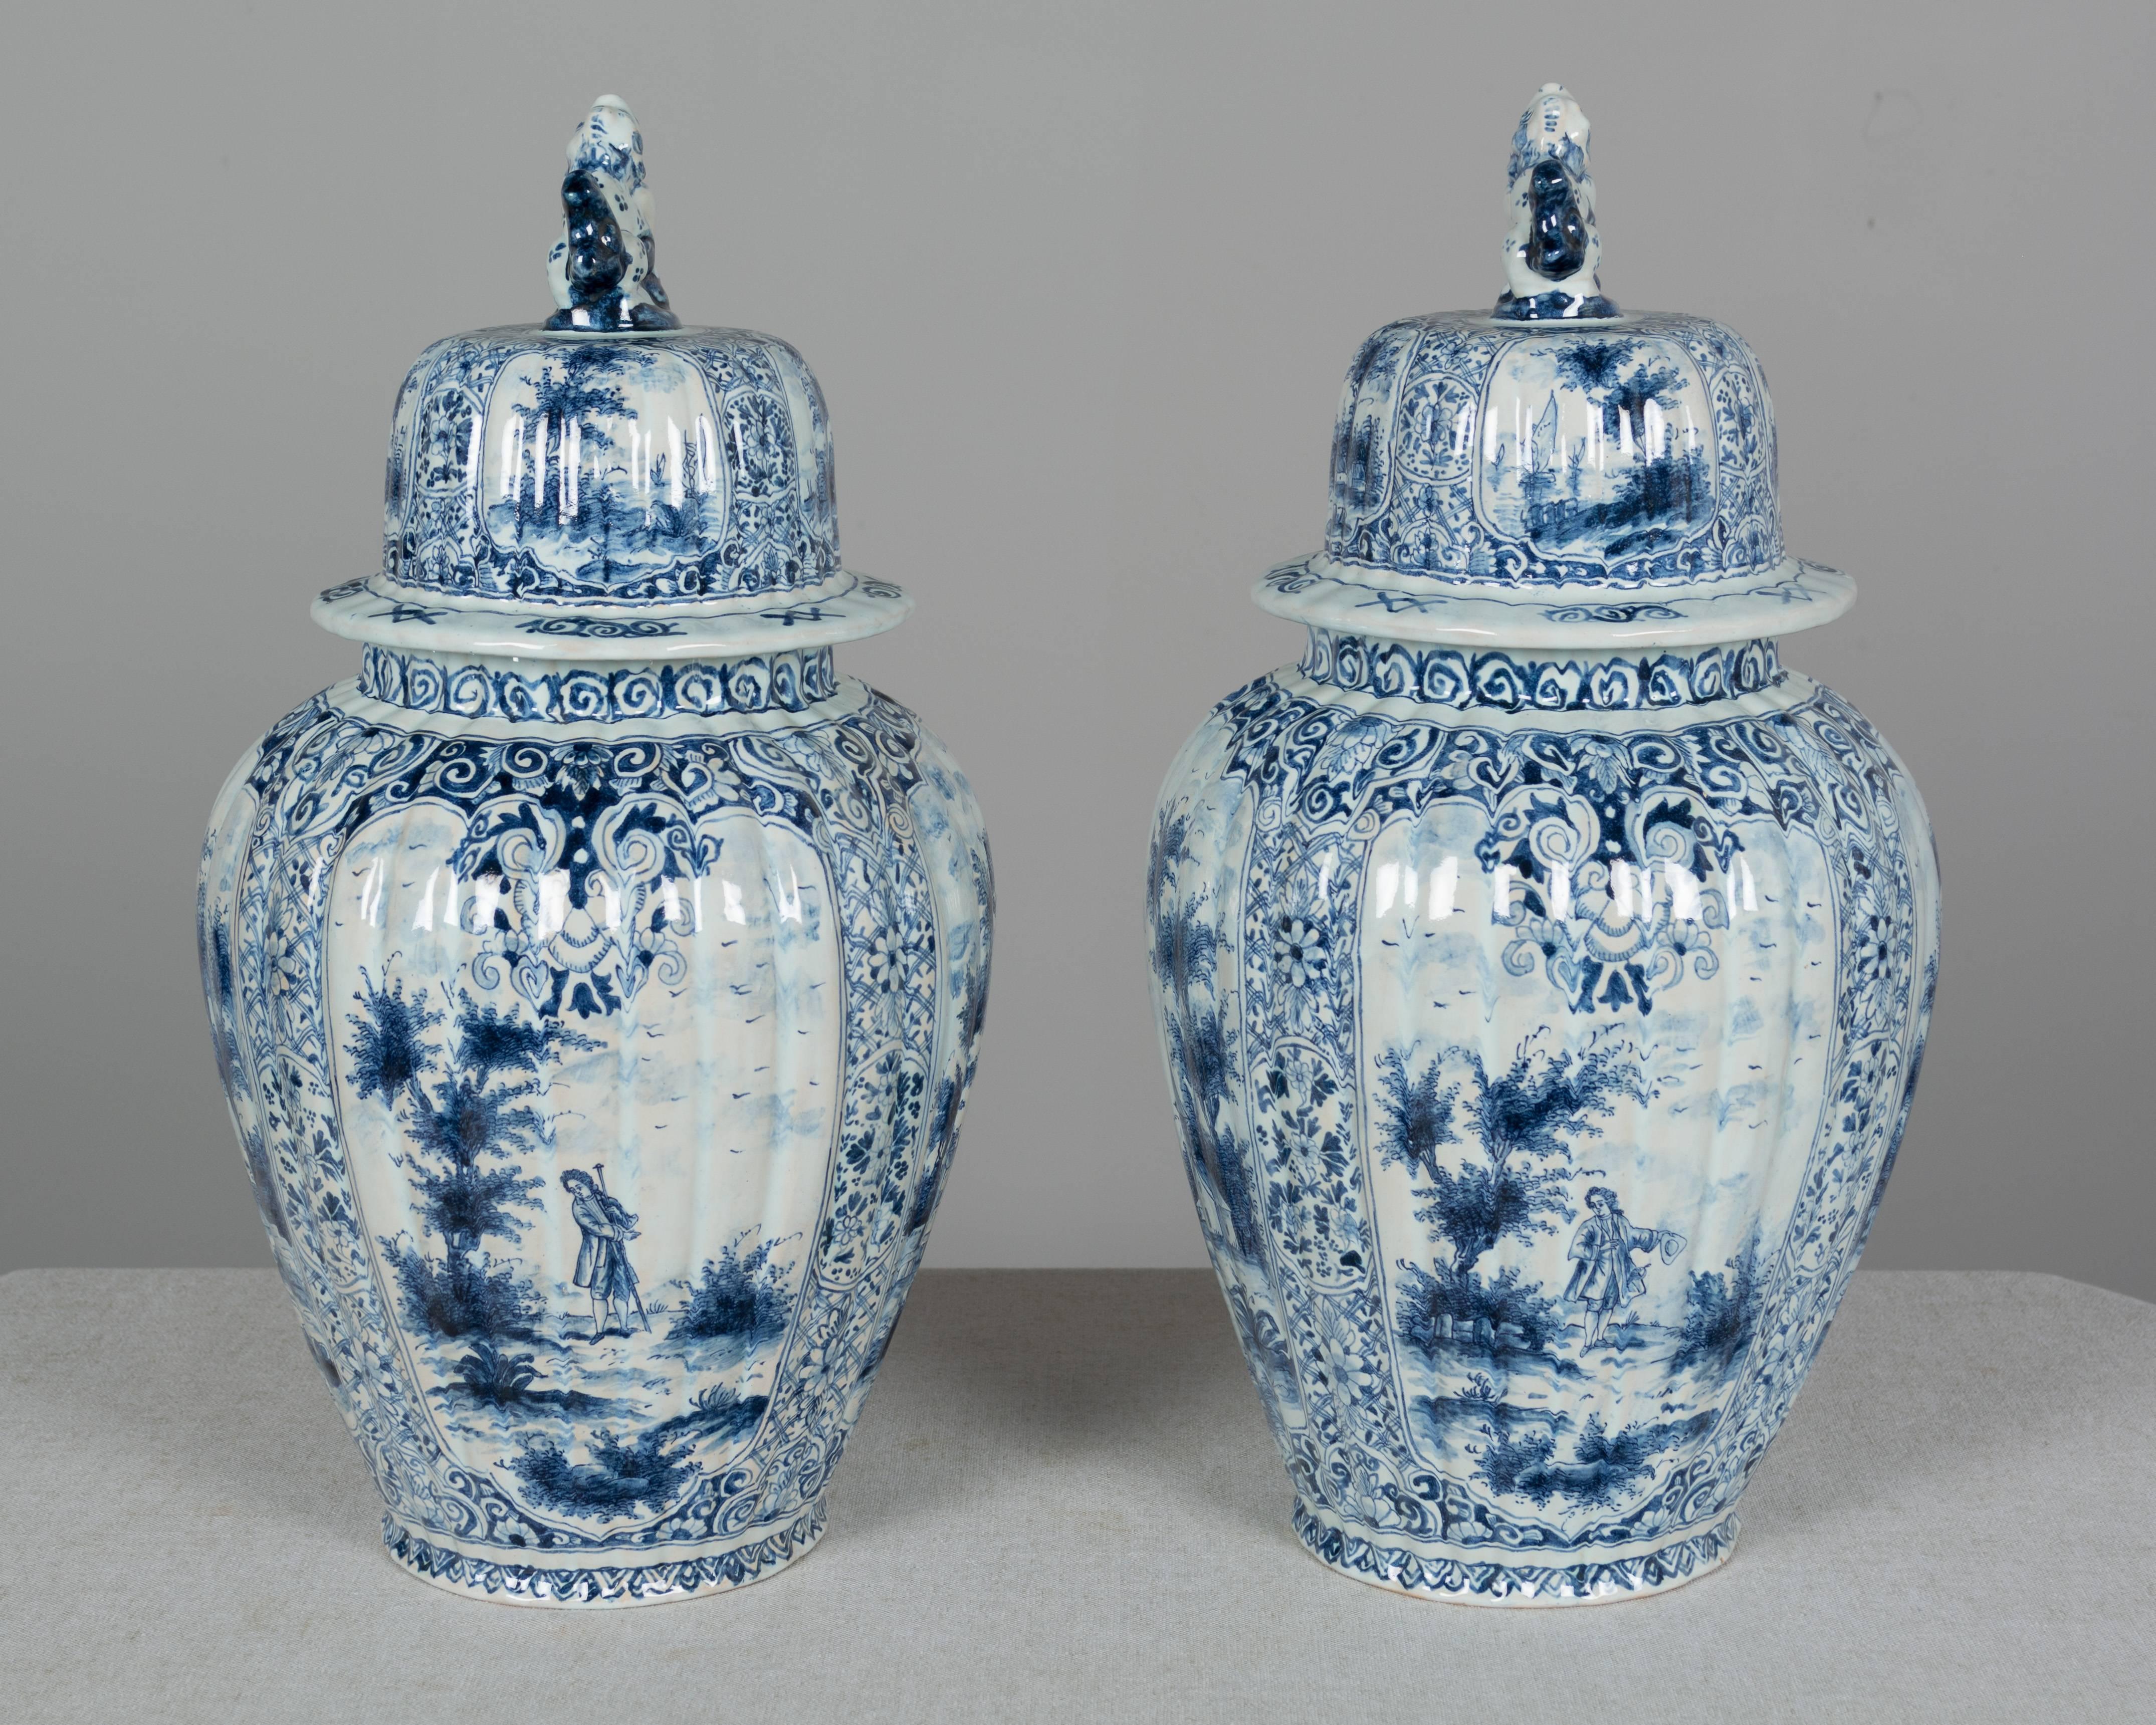 A pair of Delft faience blue and white ginger jars with traditional ribbed urn form and lids topped with foo lion knobs. Each with four painted panels bordered with elaborate floral decoration and depicting coastal scenes with boats and figures in